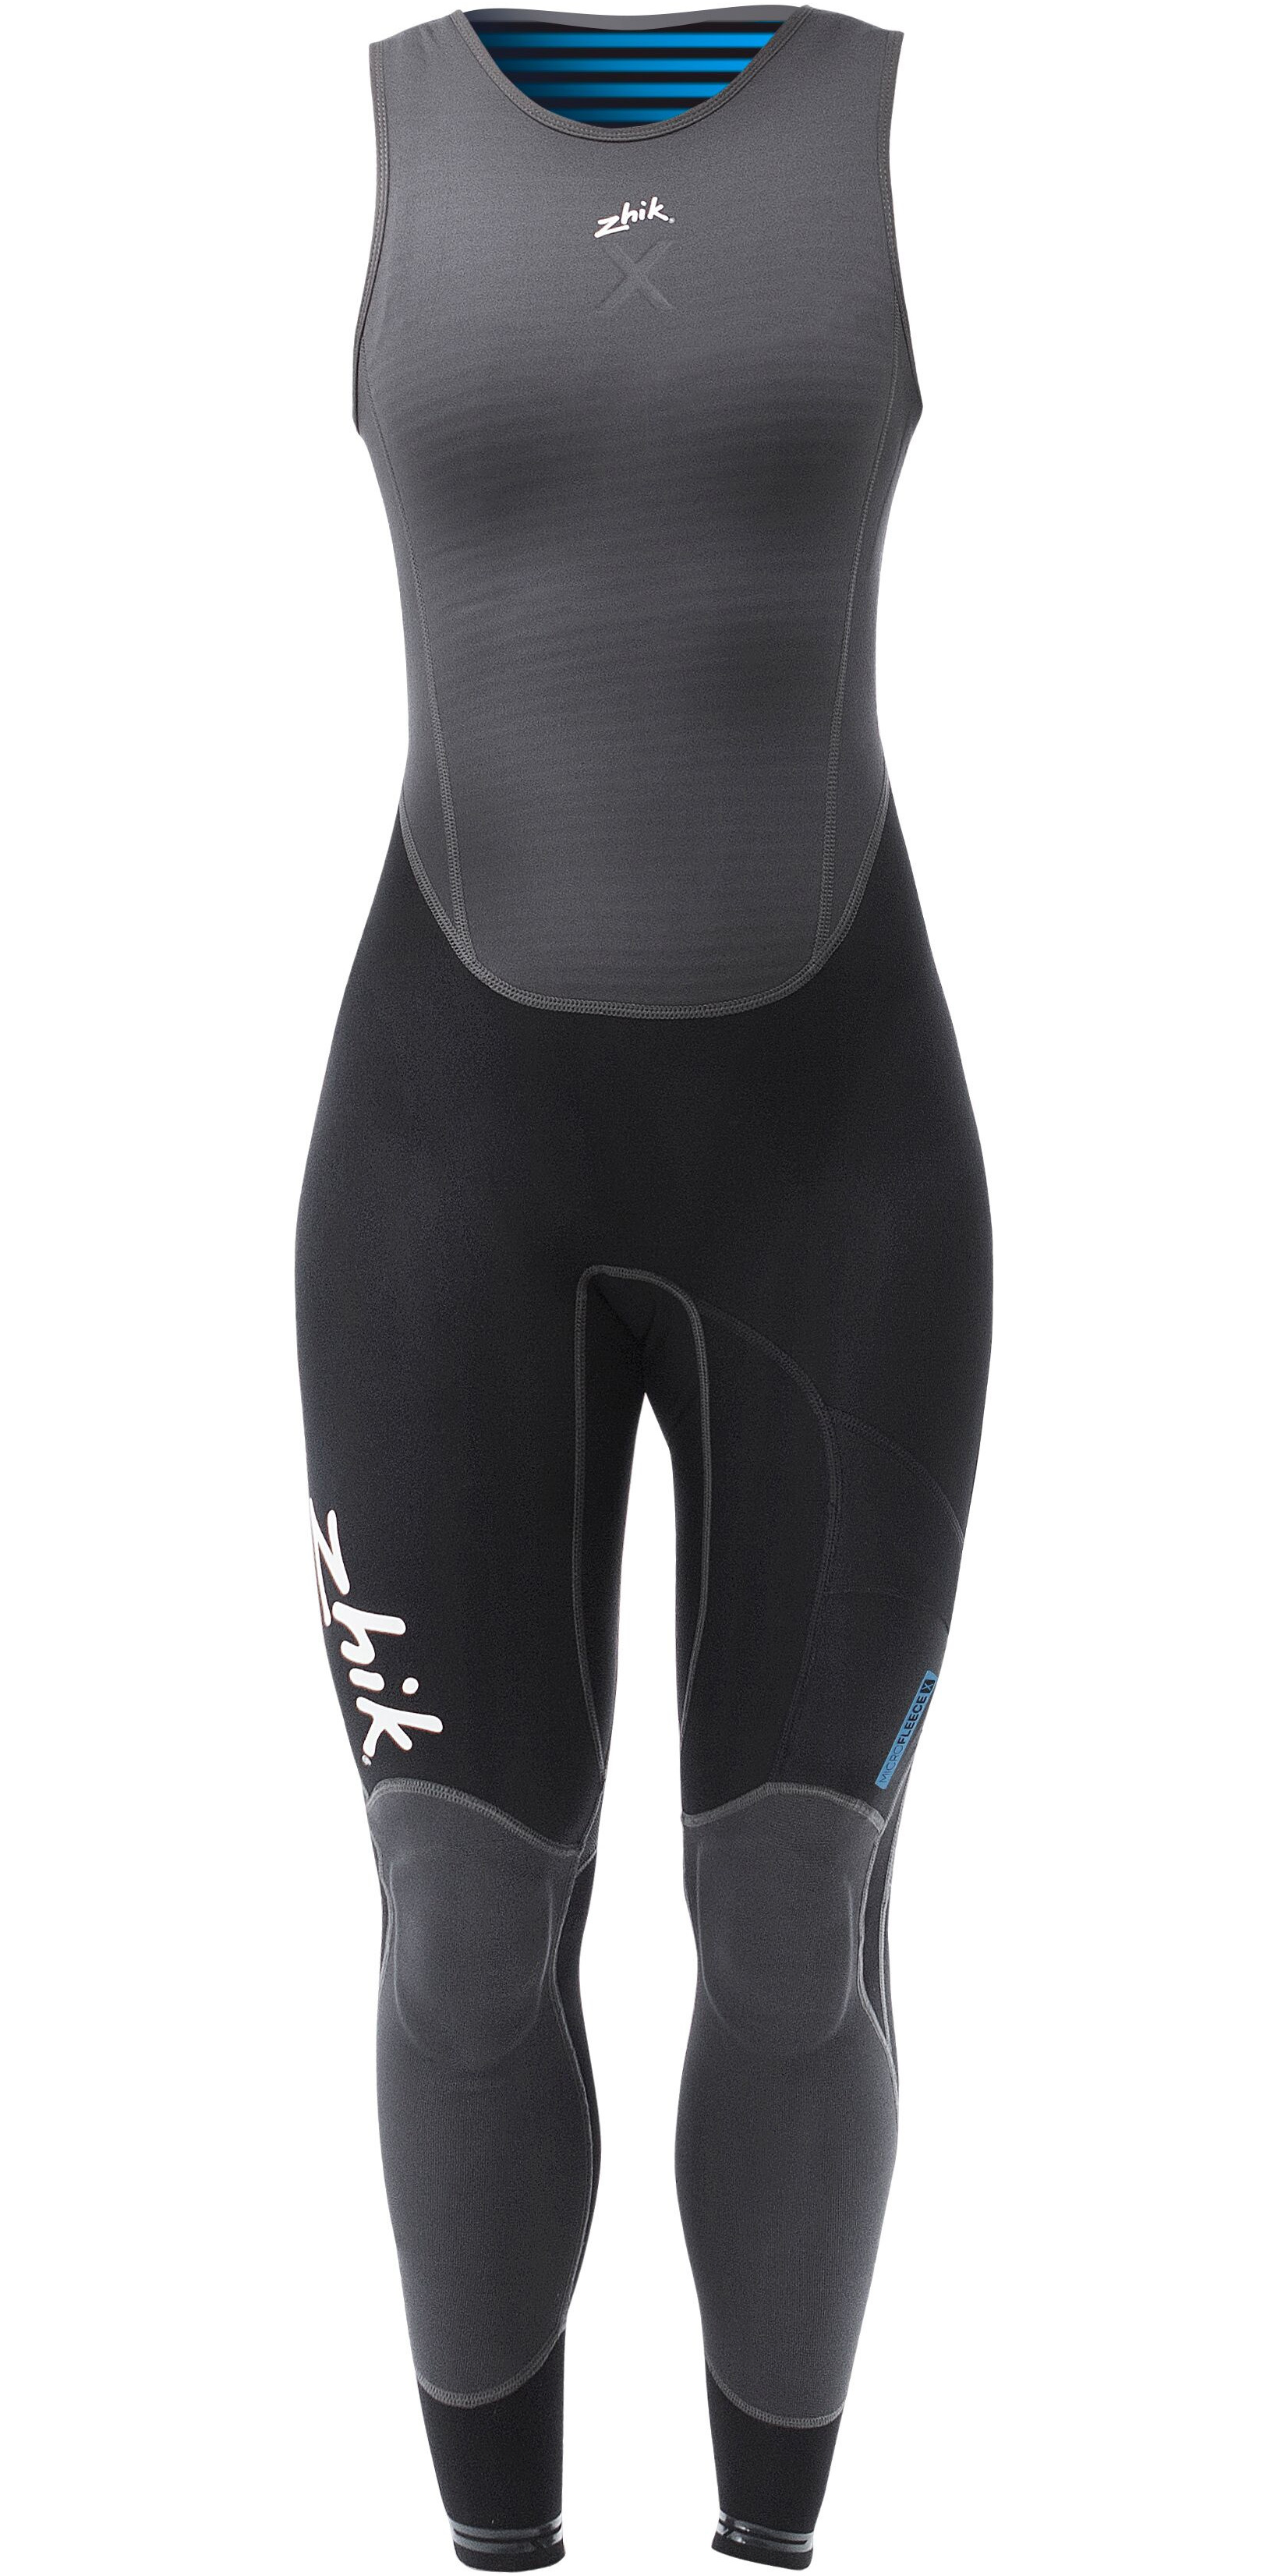 Microfleece X 1mm Long John Wetsuit - SKF0570W - Sailing | Watersports Outlet